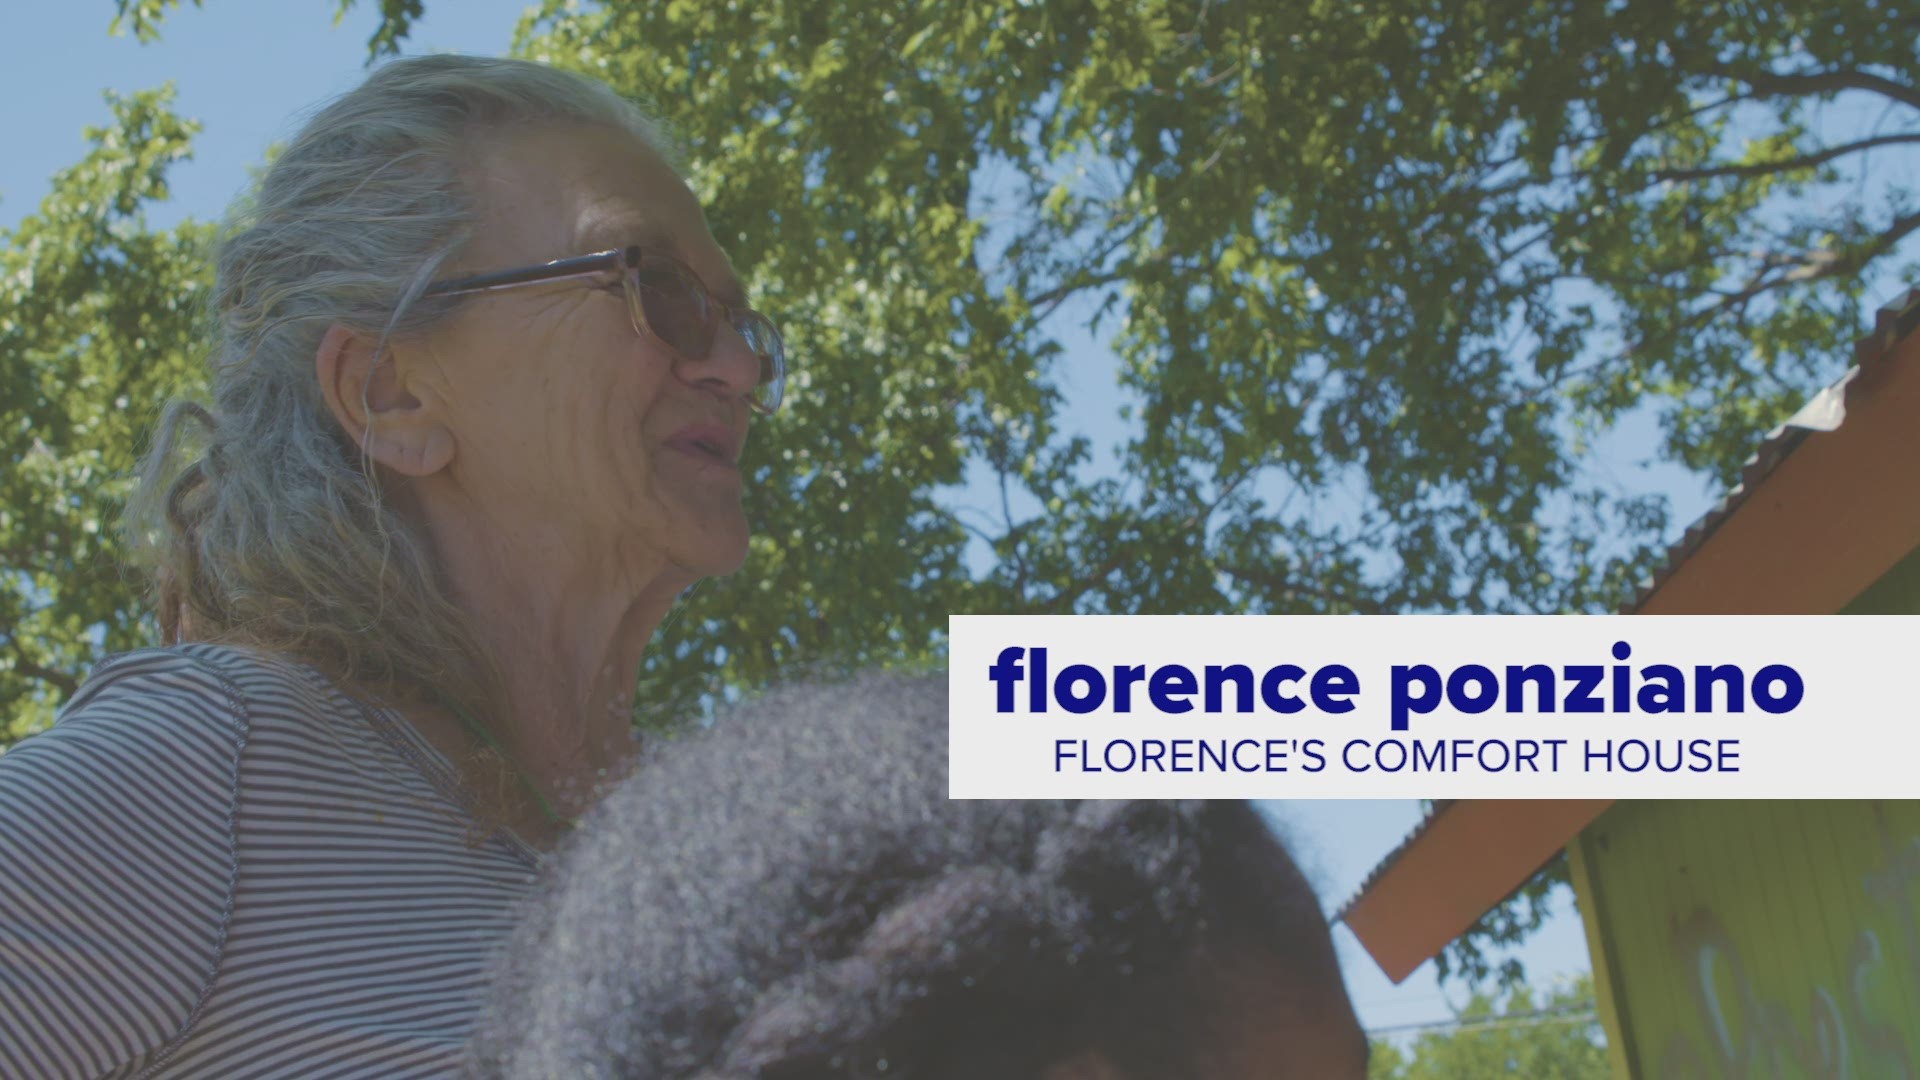 Meet Five Who Care winner Florence Ponziano.